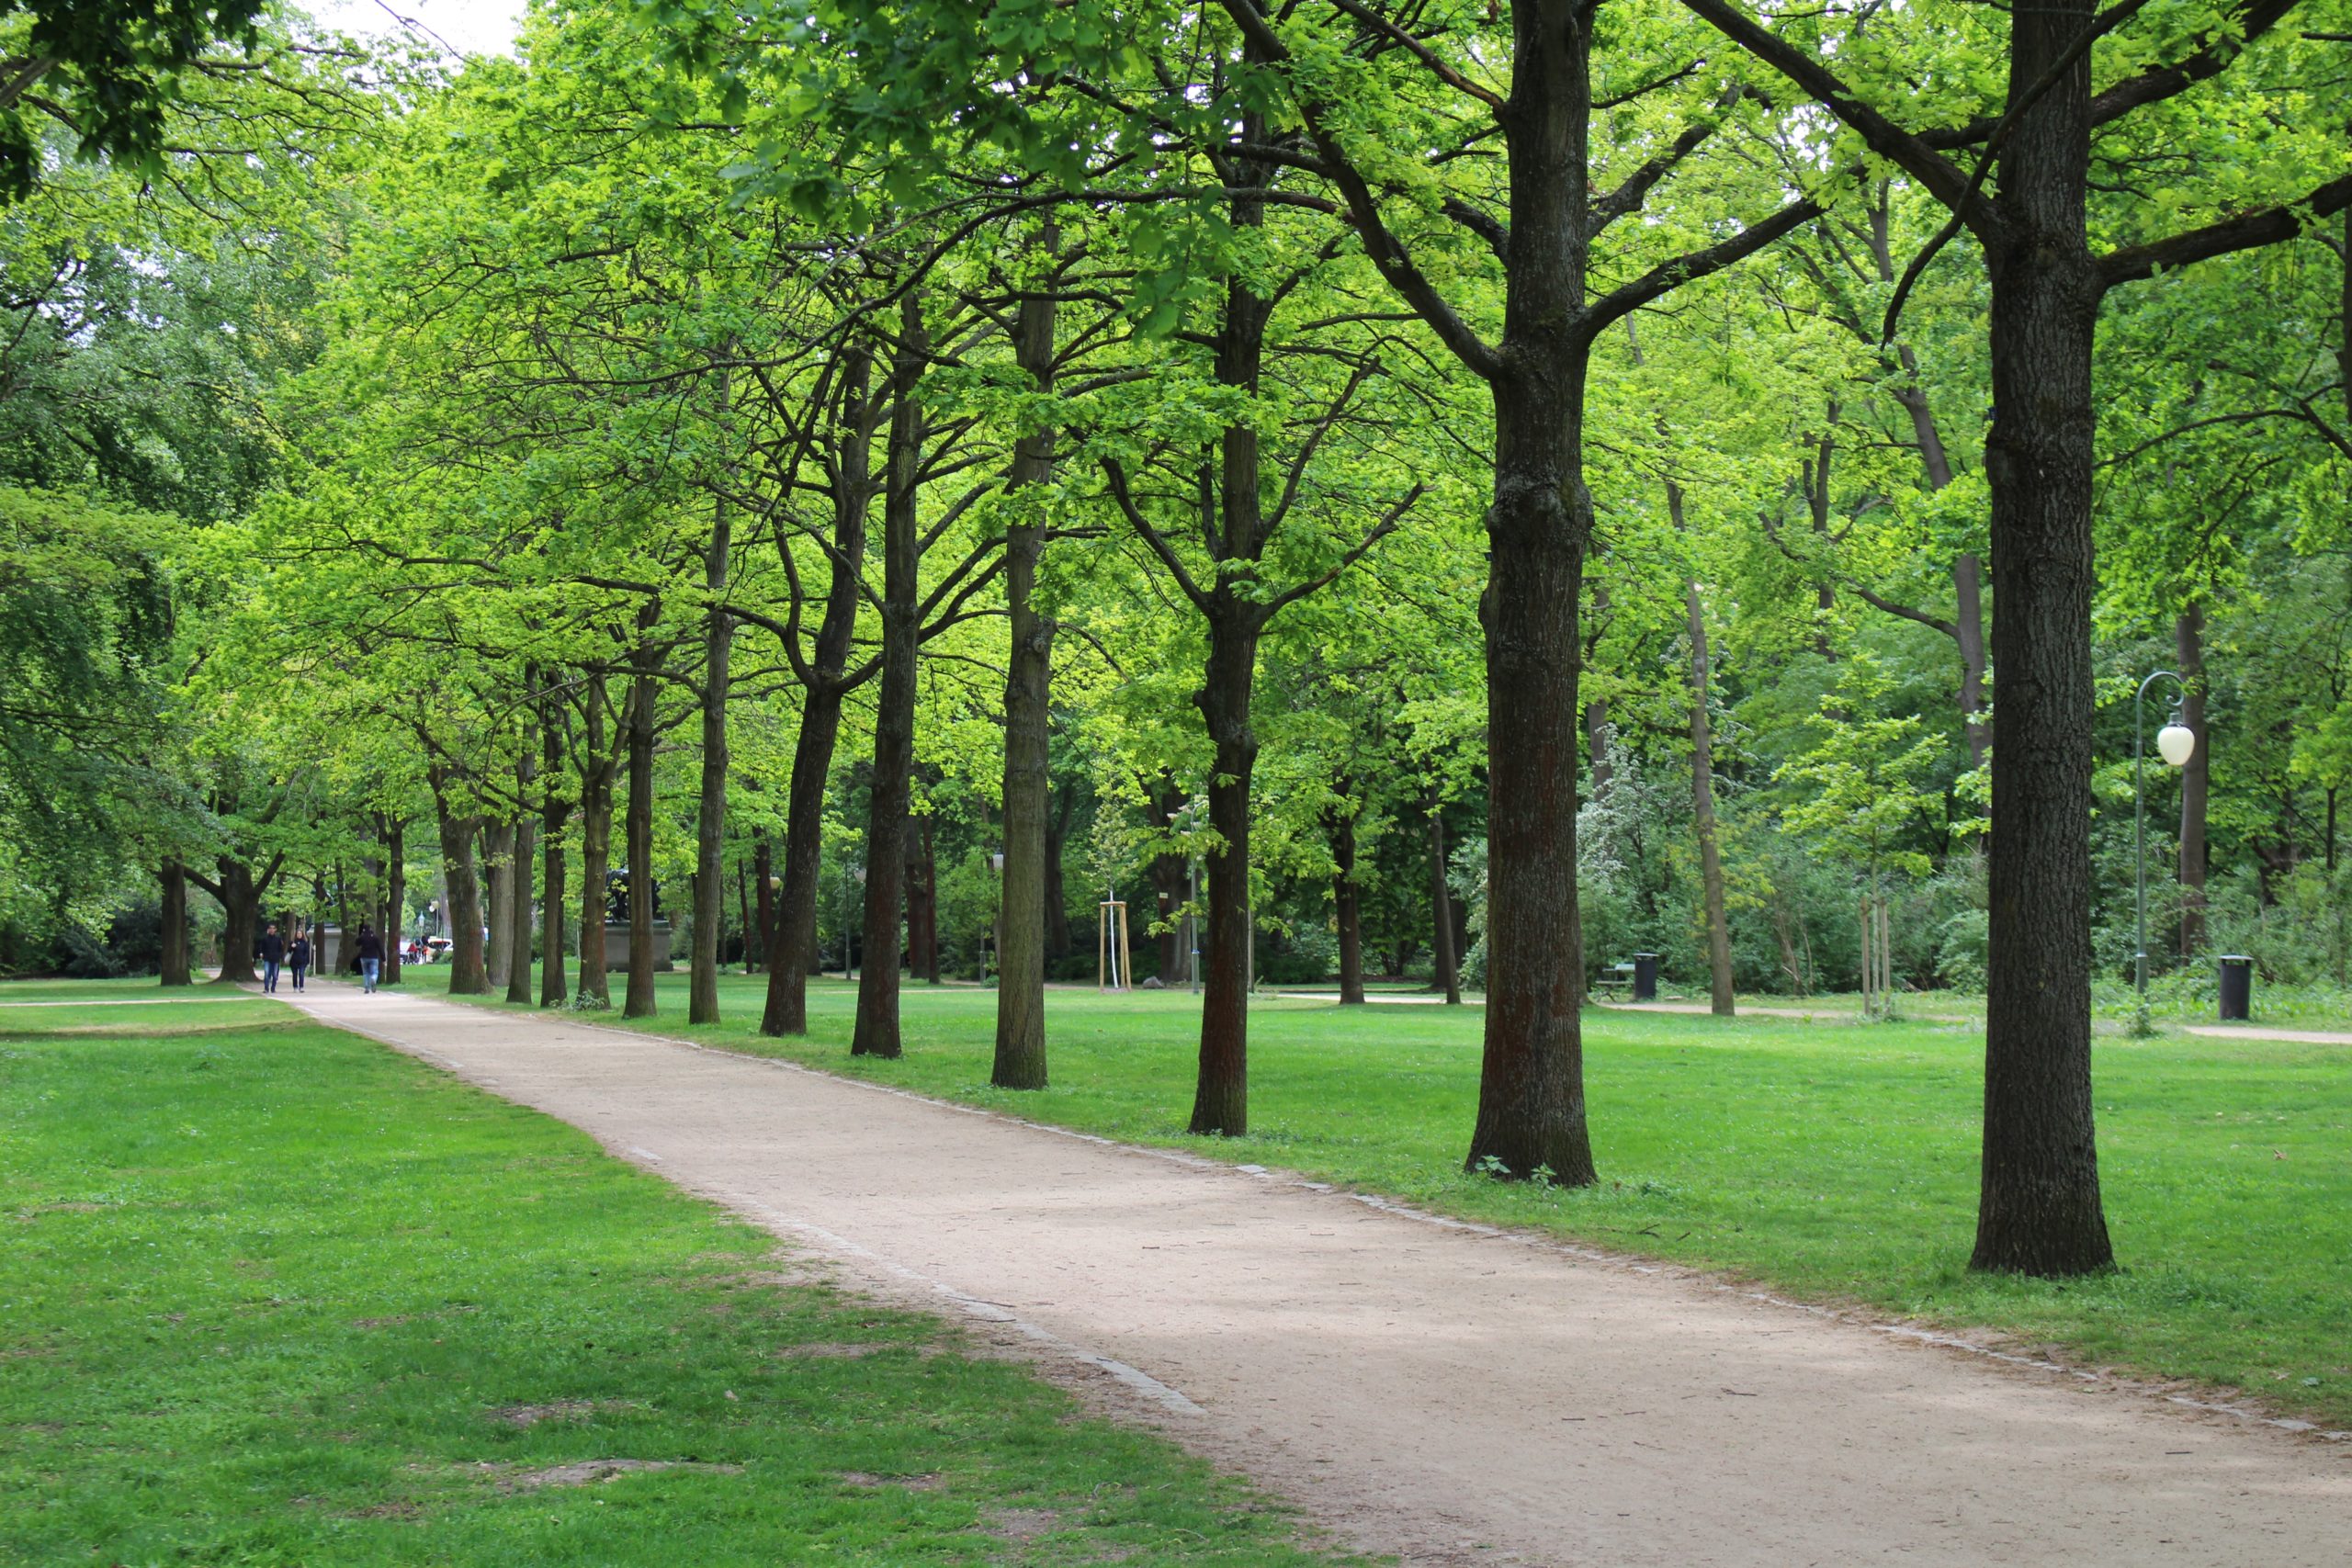 FREE Guided Mindfulness Meditation for your iPhone – Listen during lunch in the park